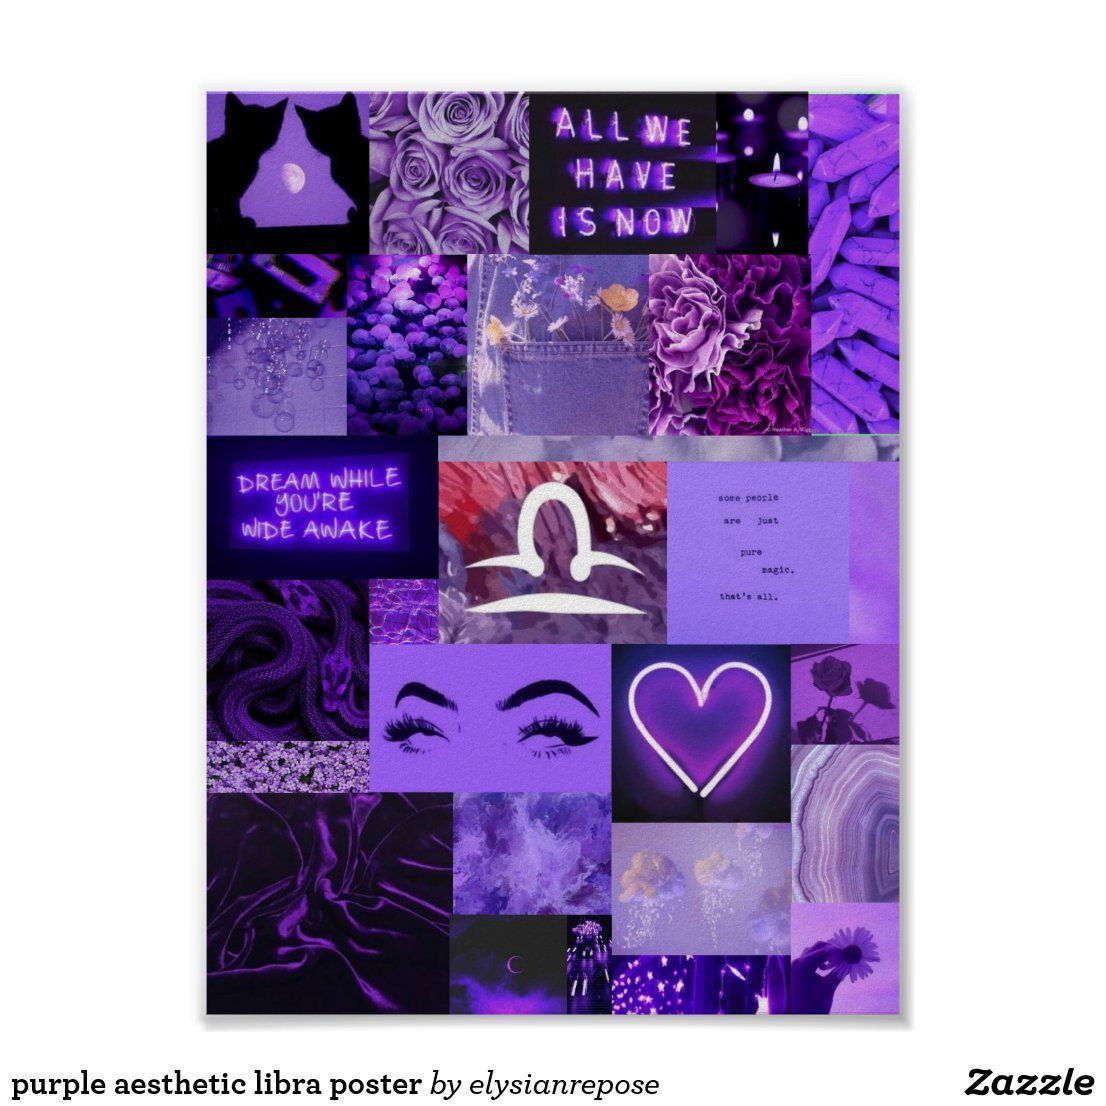 Purple aesthetic poster with various images - Pisces, Libra